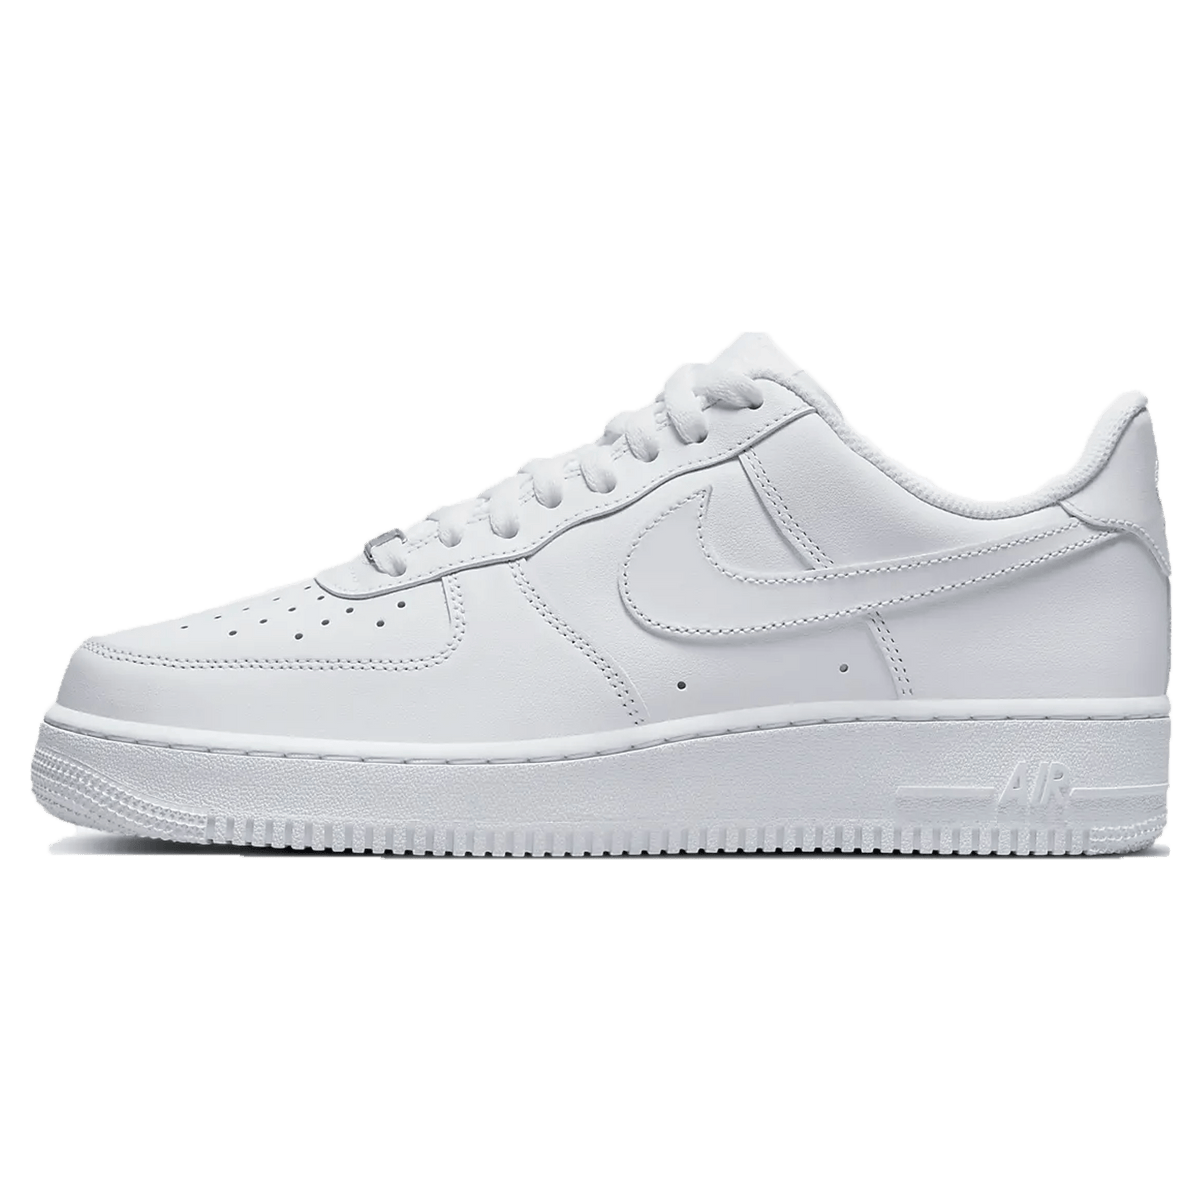 Who Was in Paris? The Nike x Off-White Air Force 1 Looms in Grey